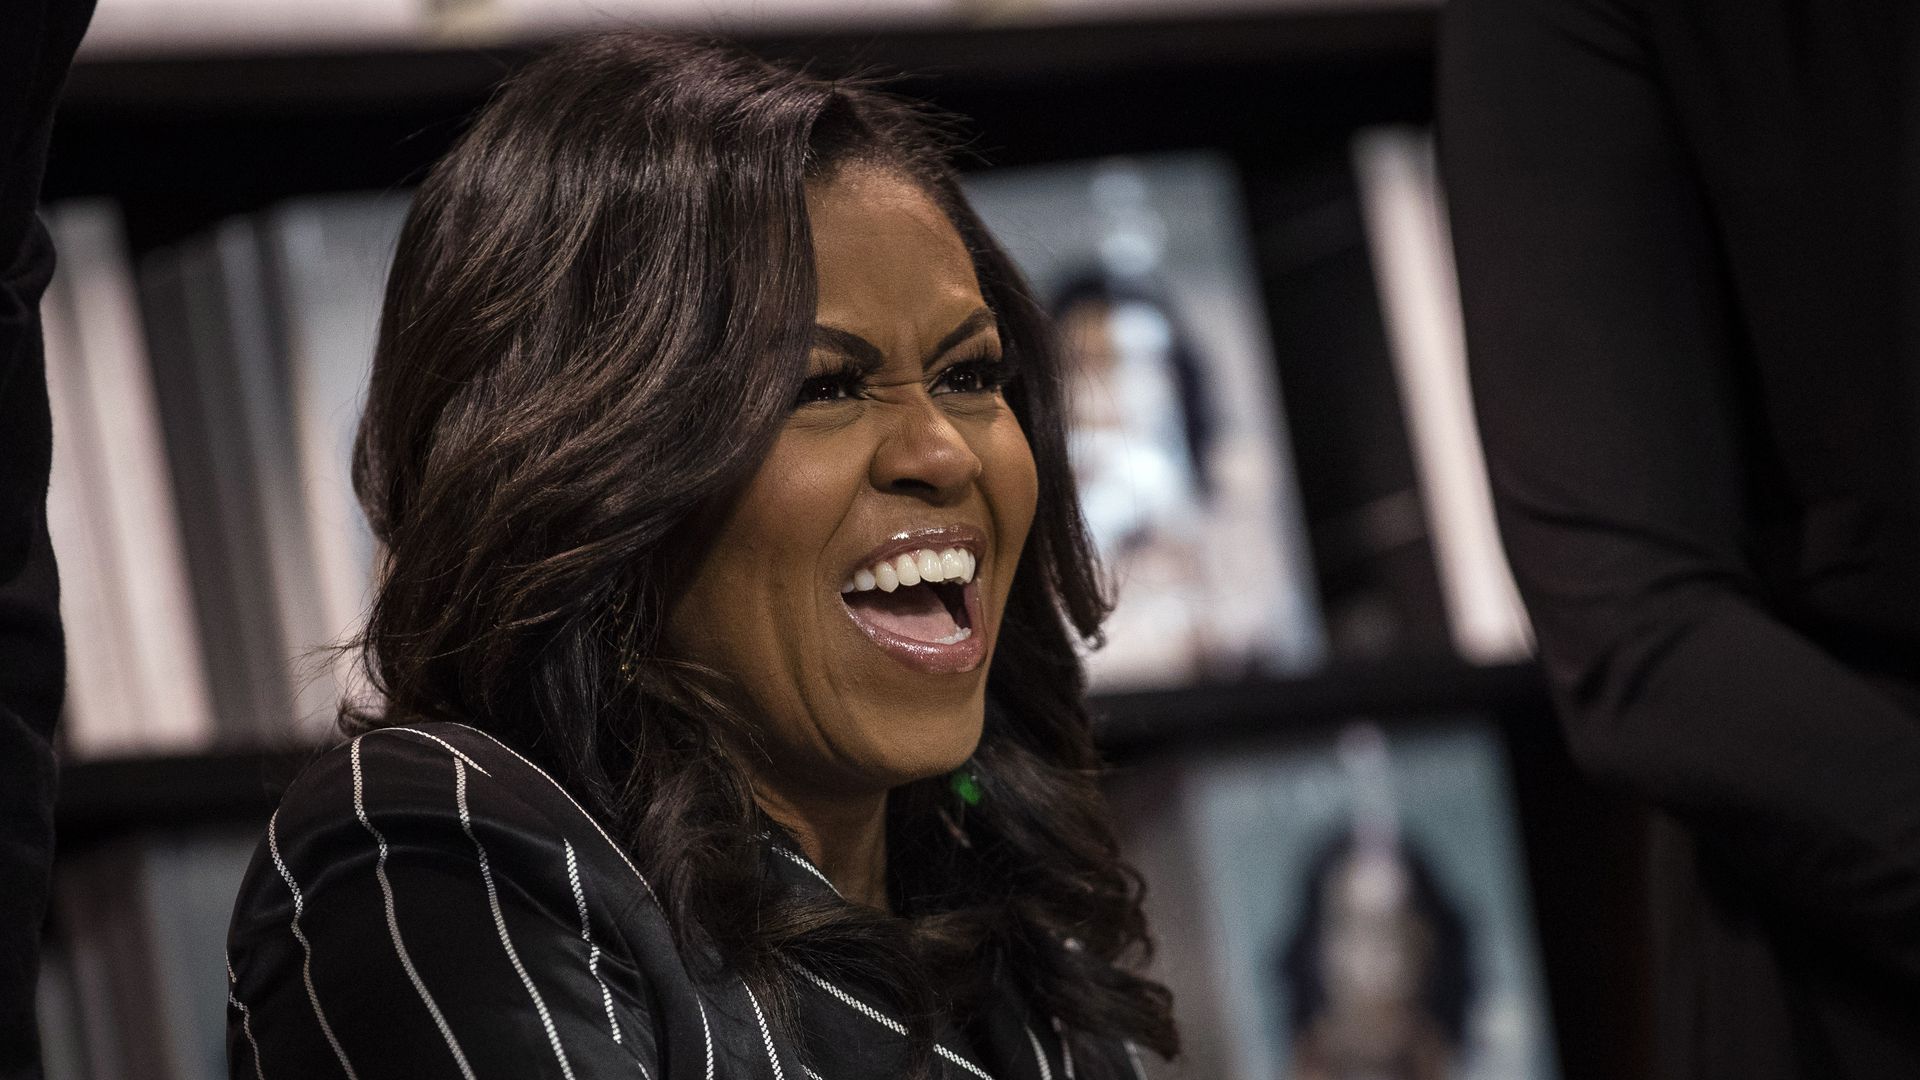 Michelle Obama's “Becoming” climbs charts as year's best